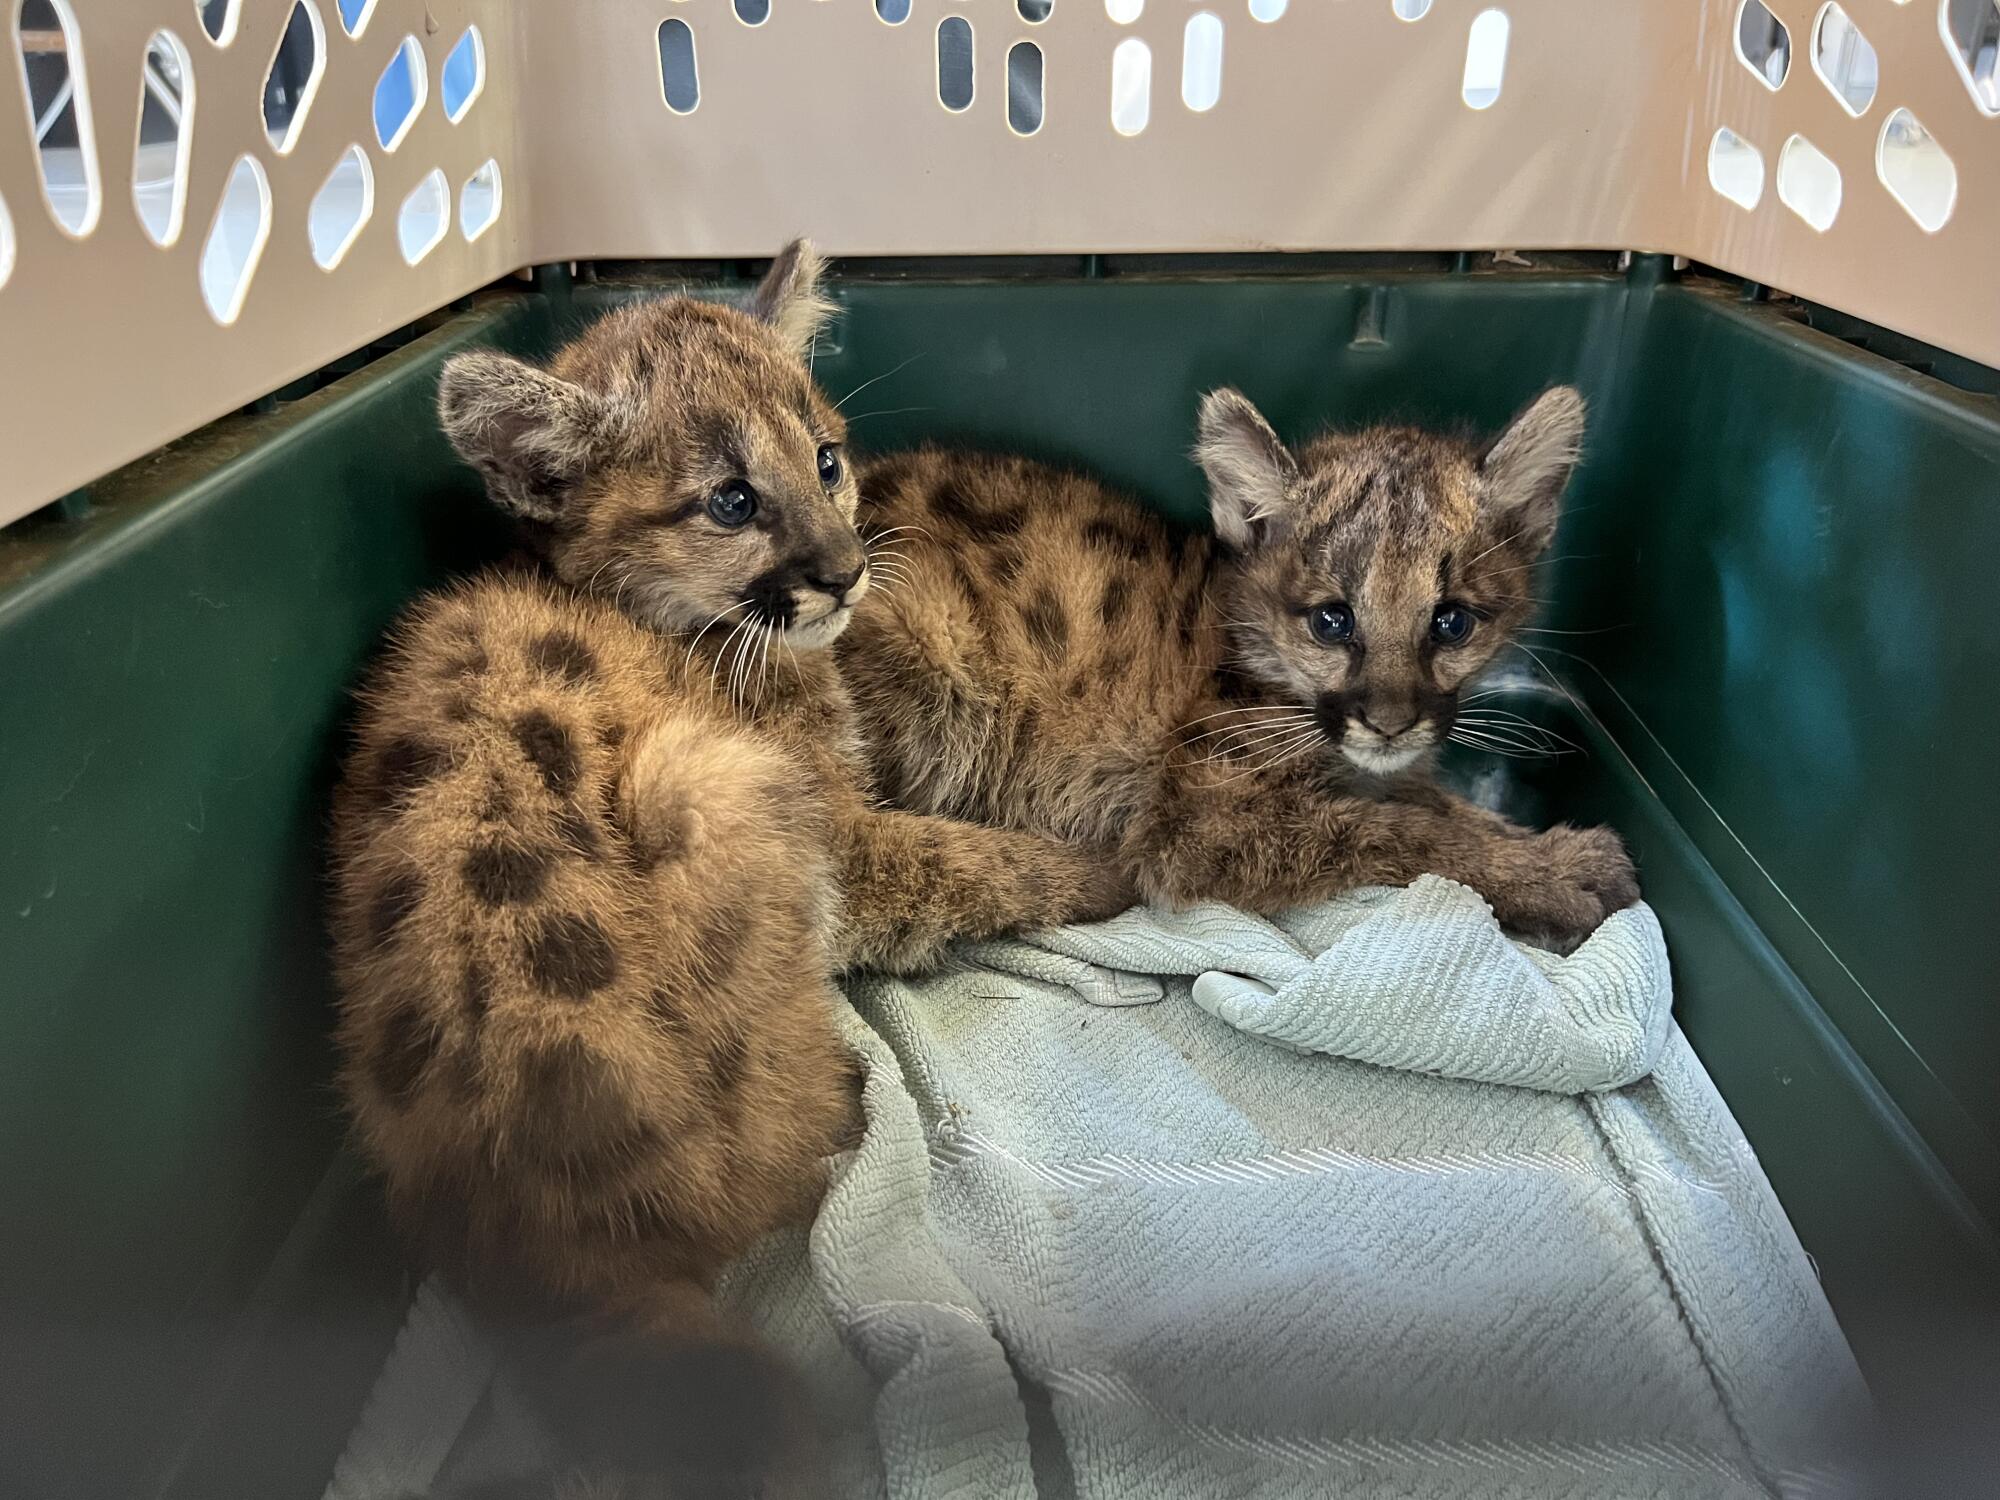 Two mountain lion kittens huddle together in a kennel crate. 